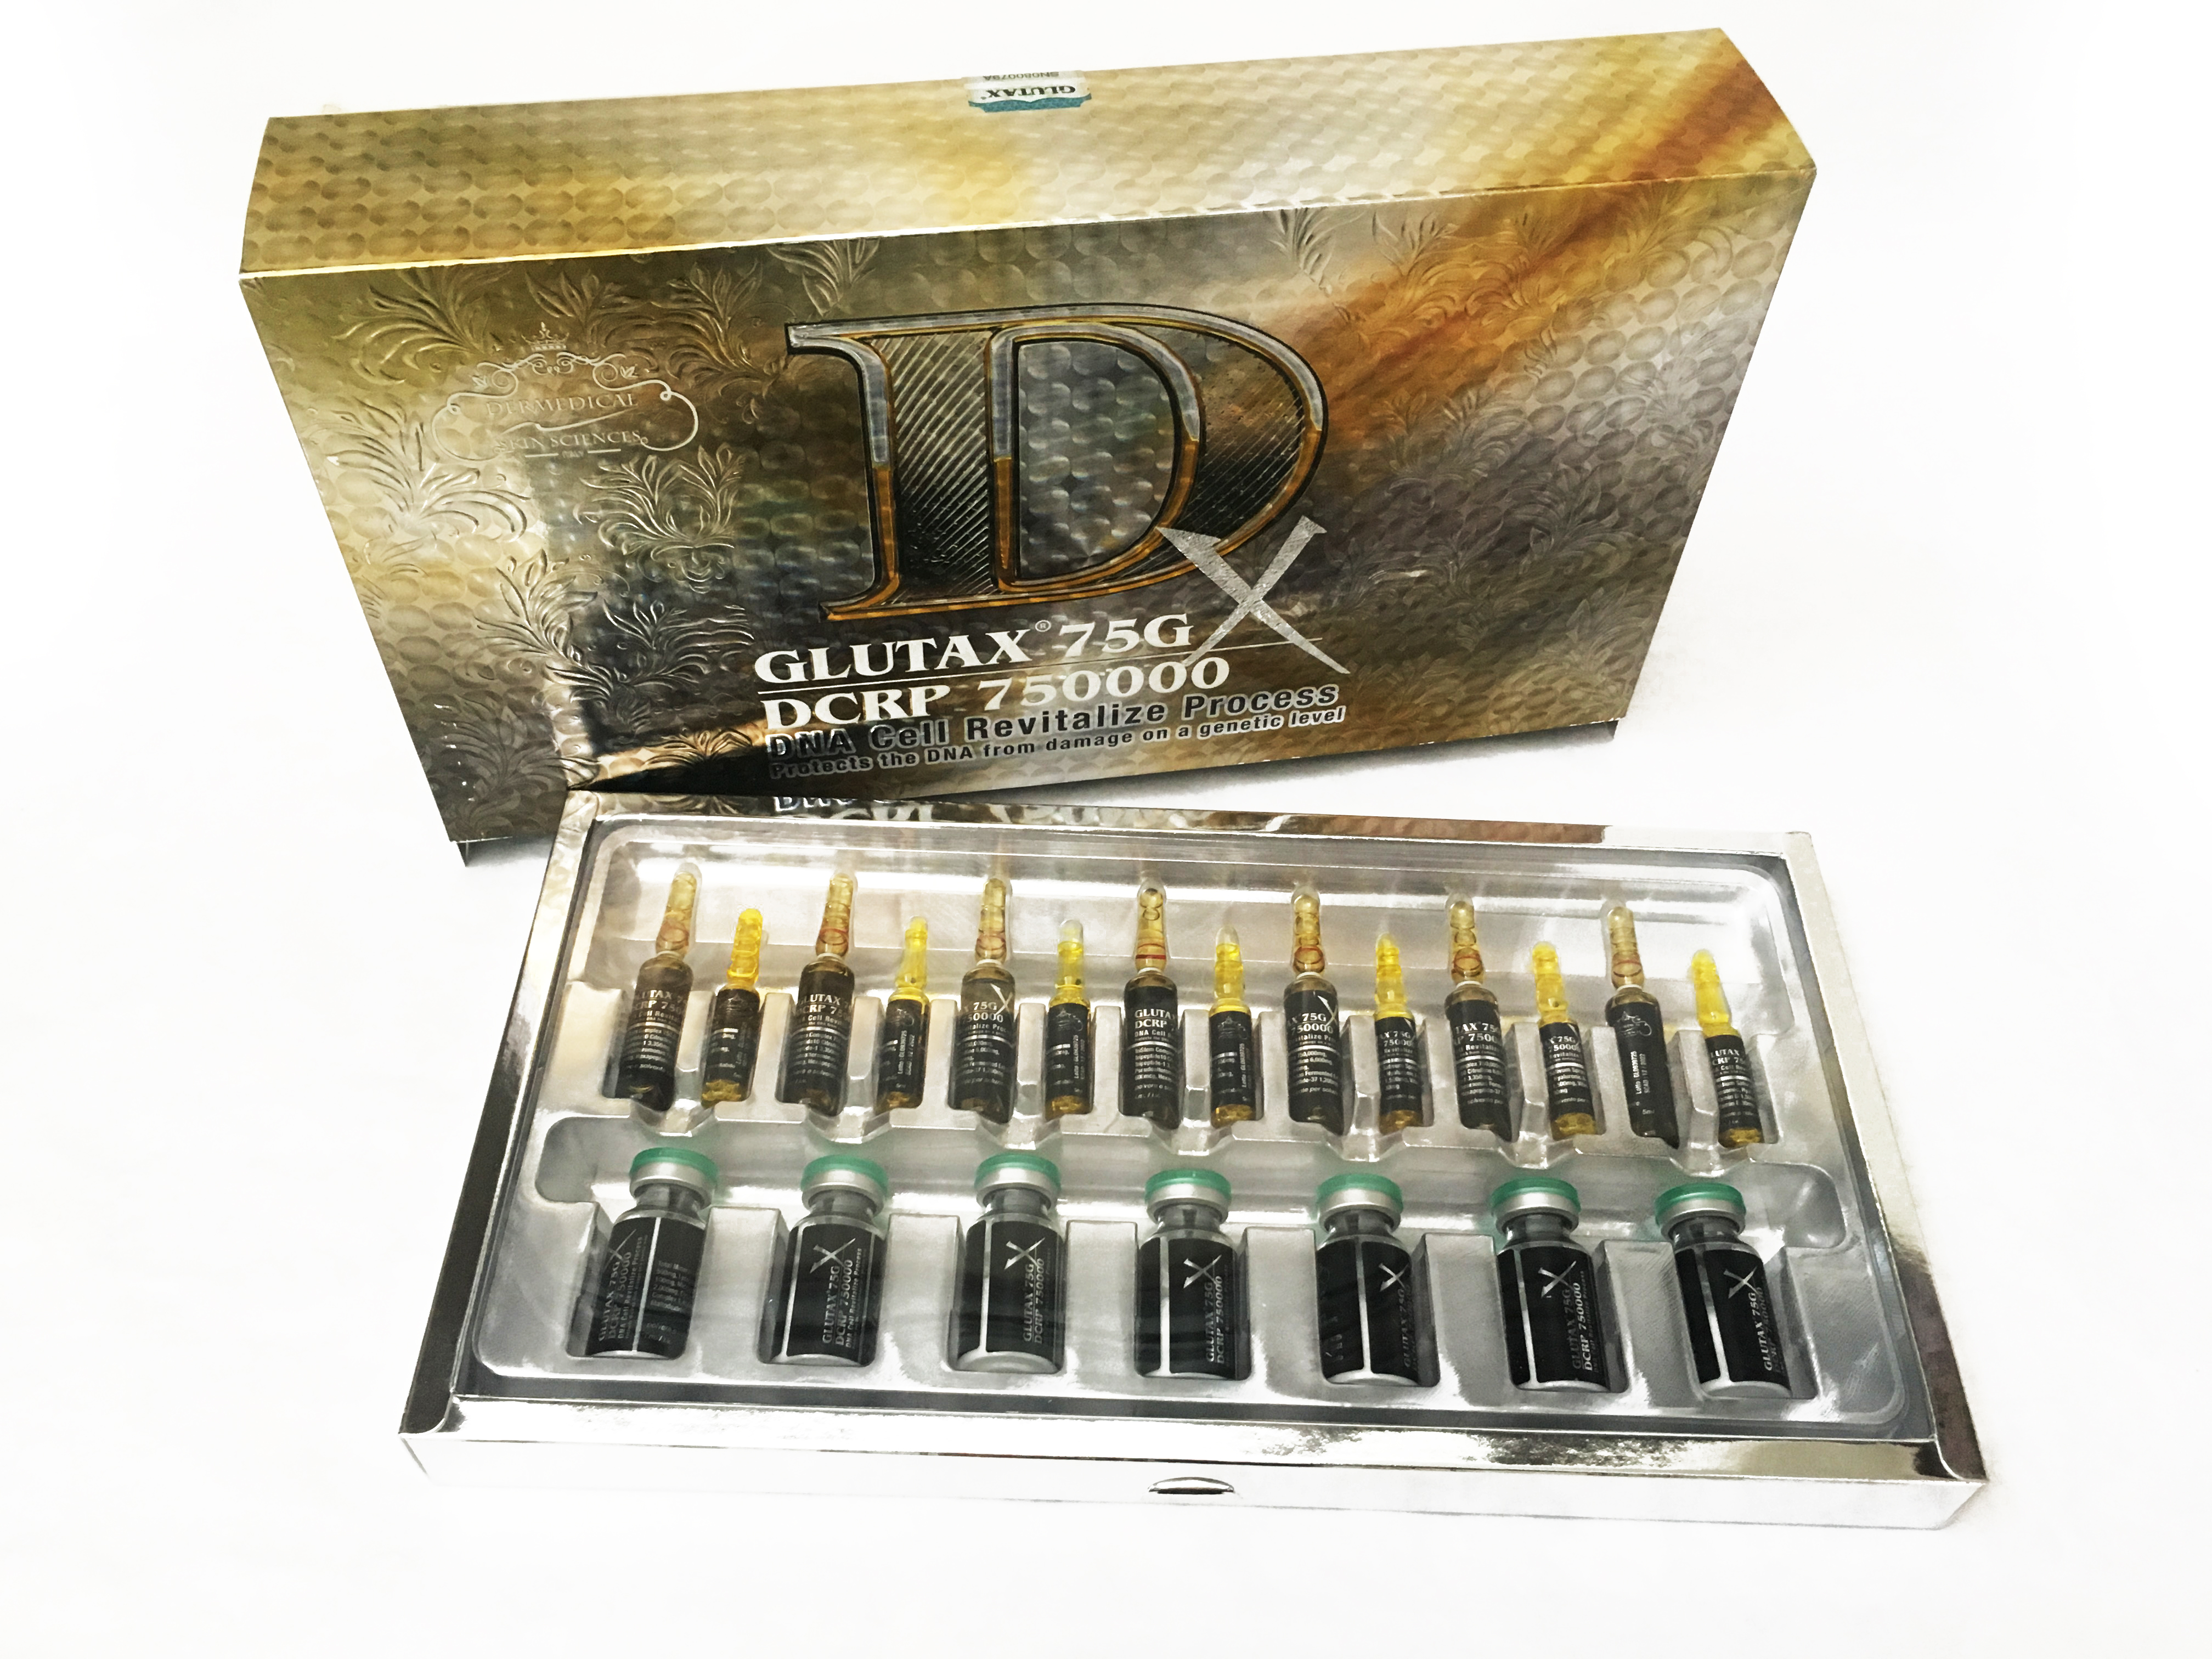 GLUTAX 75G DCRP 750000 DNA CELL REVITALIZE GLUTATHIONE SKIN WHITENING INJECTION by "www.ccthaitown.com"